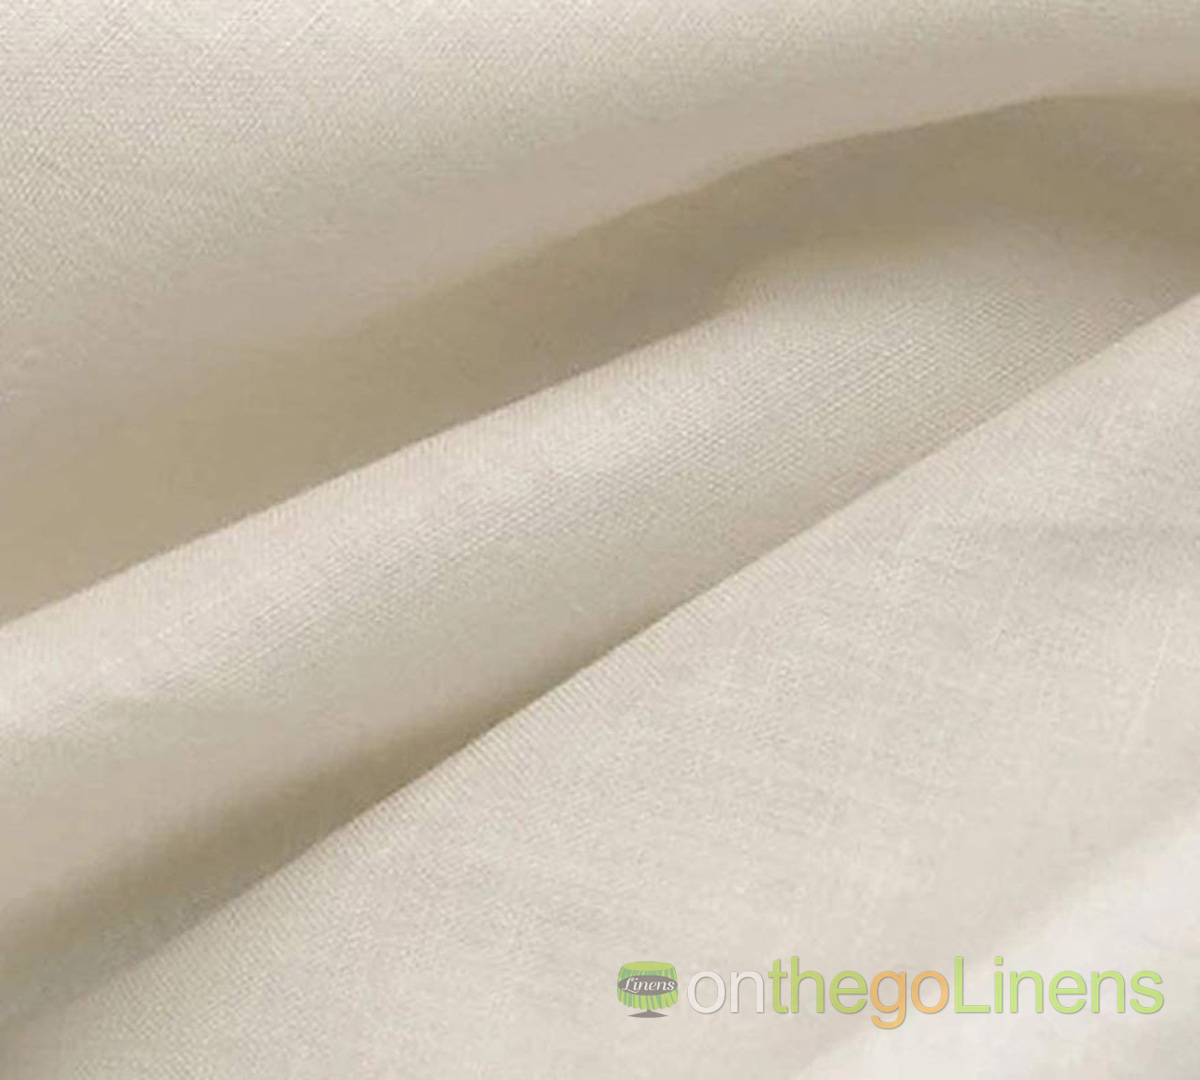 DECORATIVE SILK INC. MUSLIN NATURAL 100% COTTON HEAVY QUALITY UNBLEACHED  FABRIC BY THE YARD 60 WIDE 